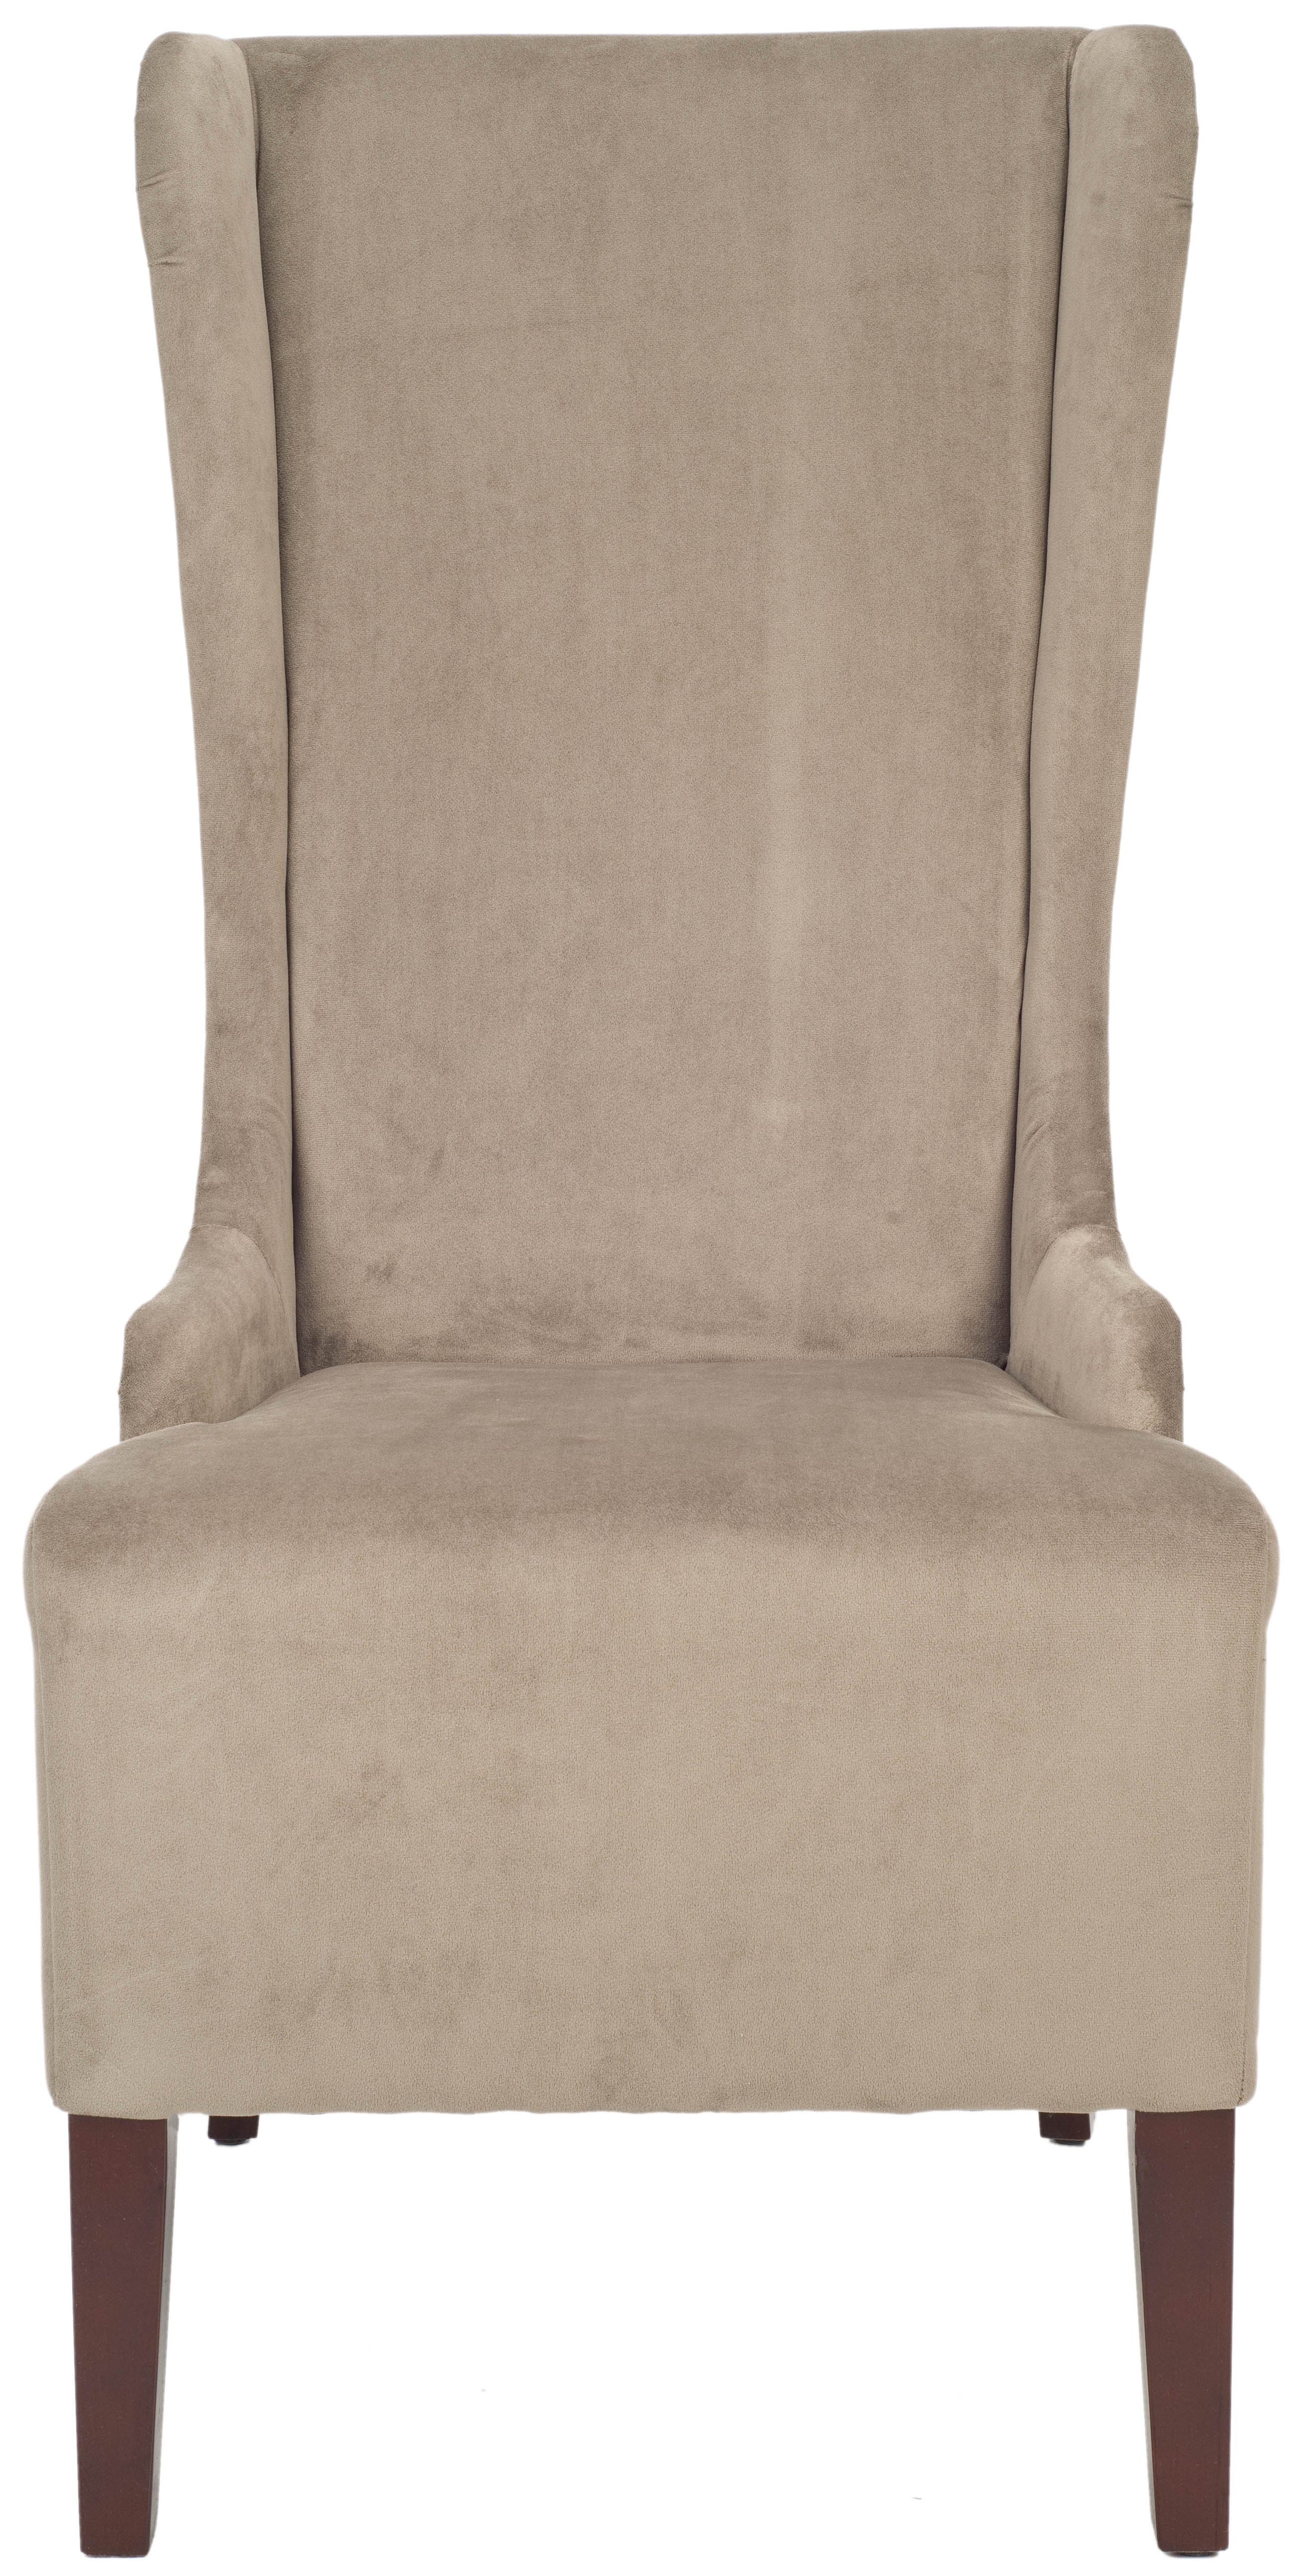 Becall 20''H Cotton Dining Chair - Mushroom Taupe/Cherry Mahogany - Arlo Home - Image 0